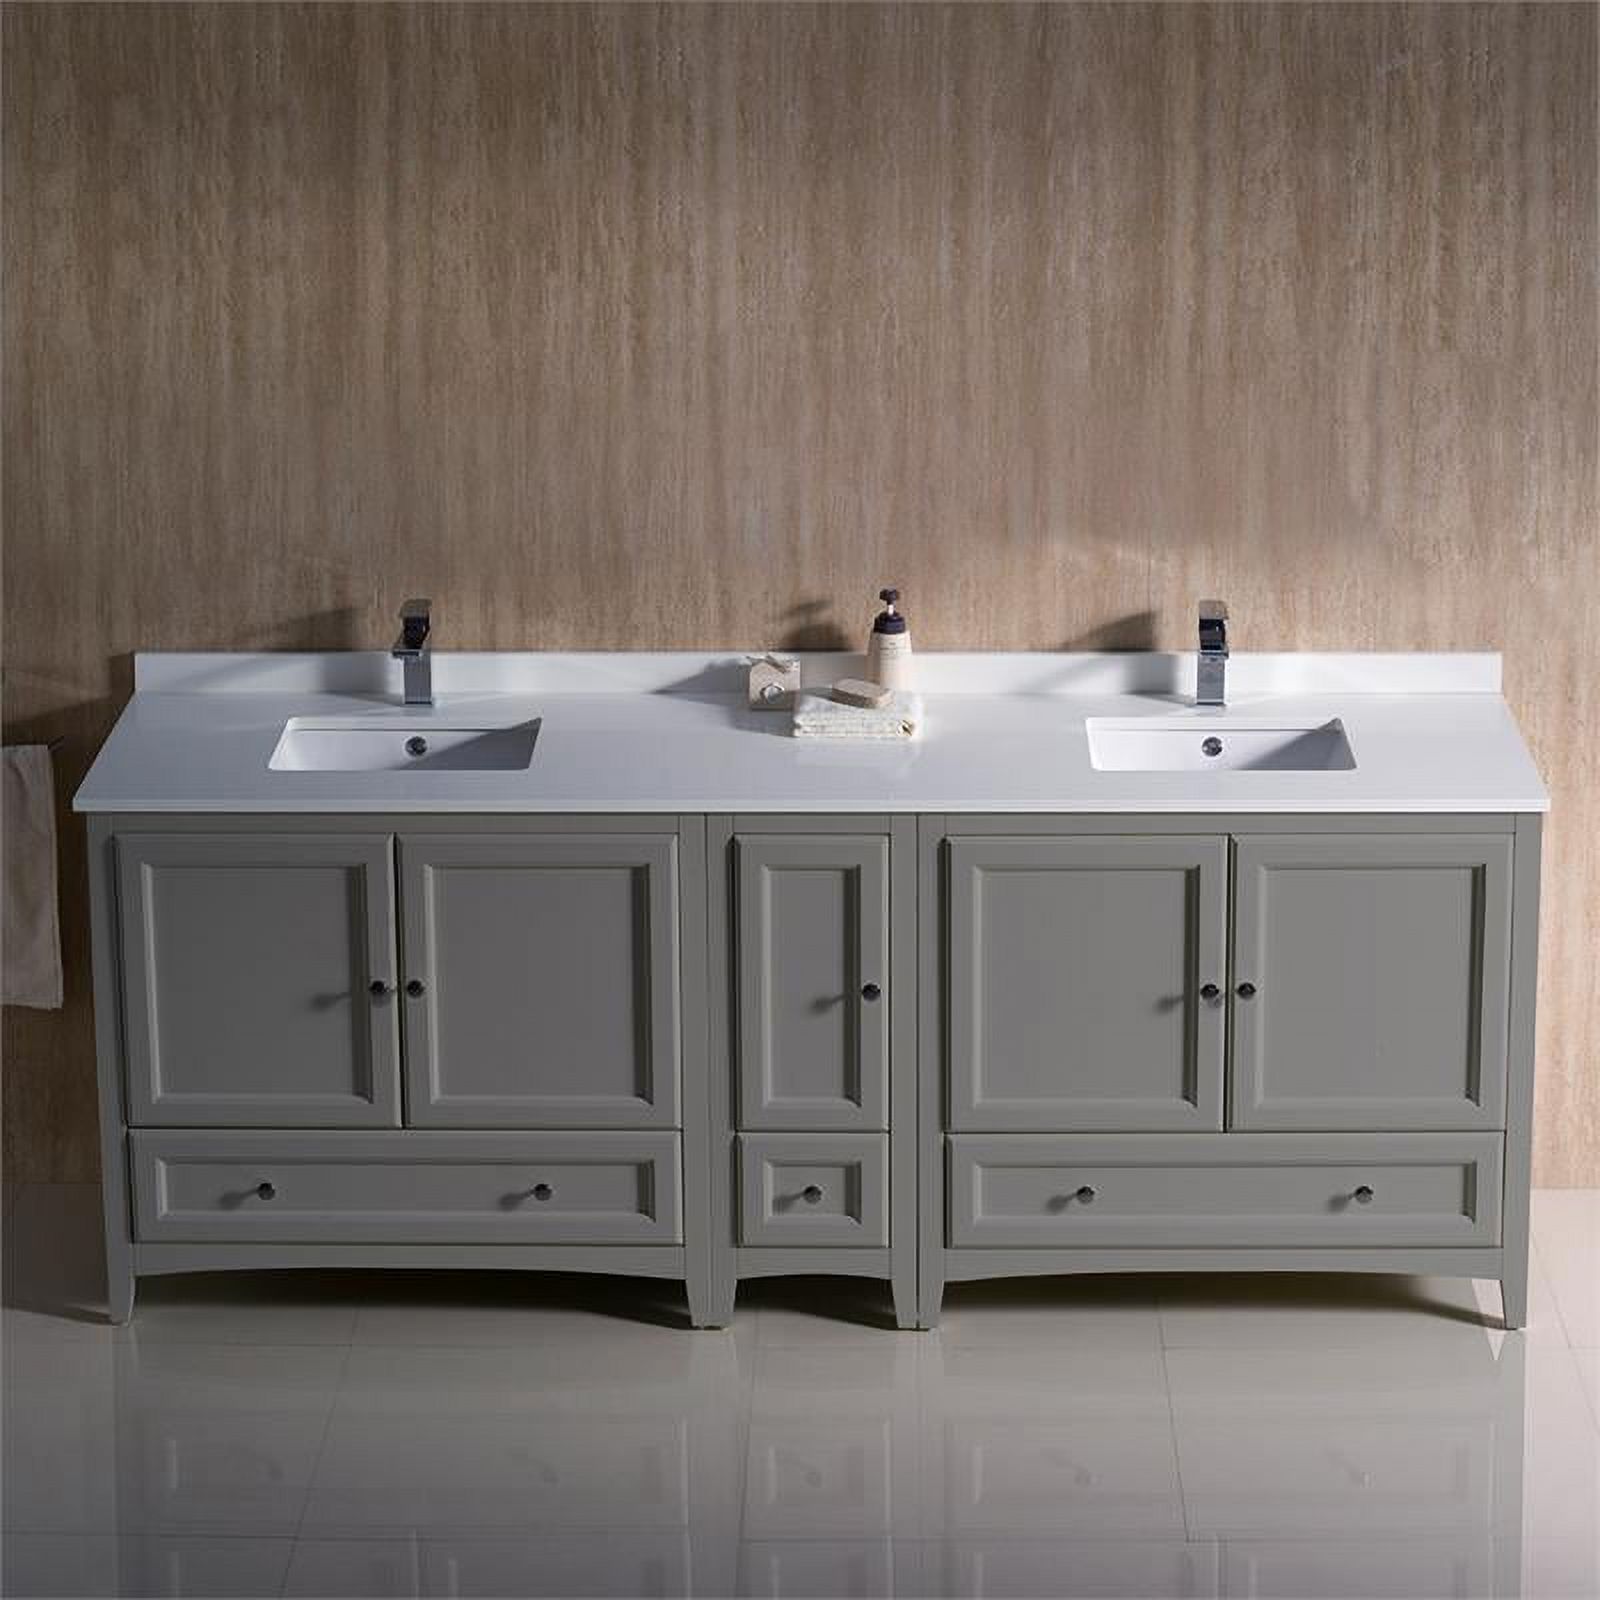 Fresca Oxford 72" Double Sinks Traditional Wood Bathroom Cabinet in Gray - image 2 of 3